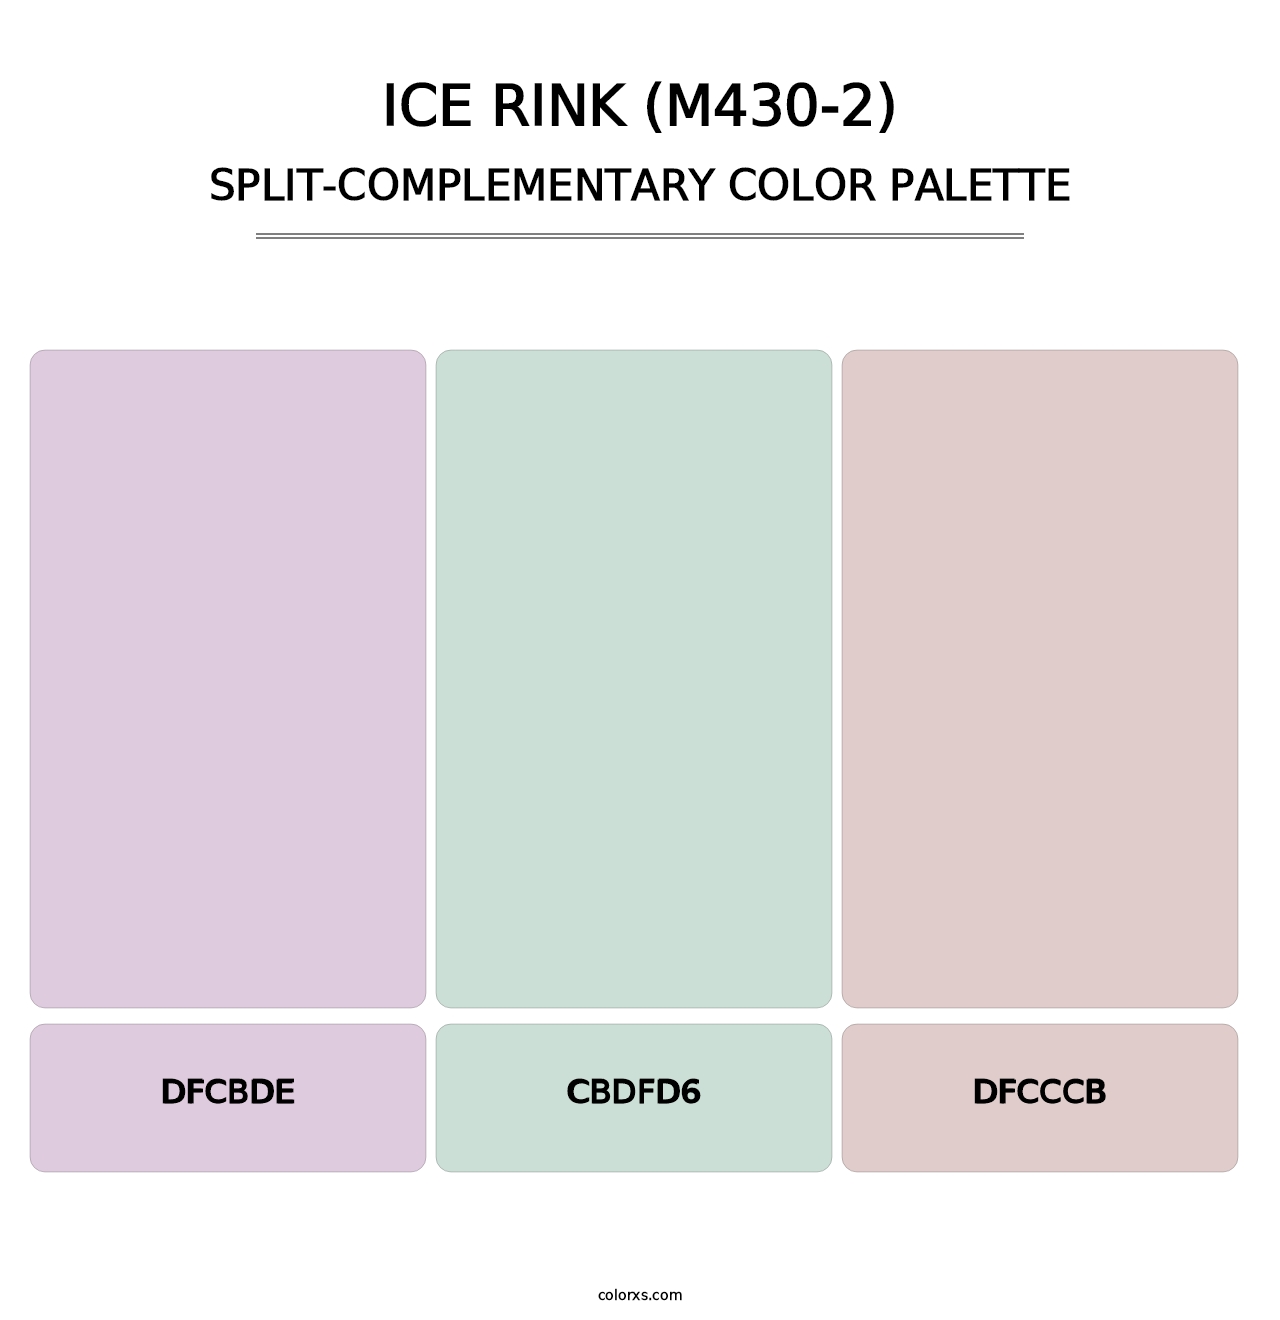 Ice Rink (M430-2) - Split-Complementary Color Palette